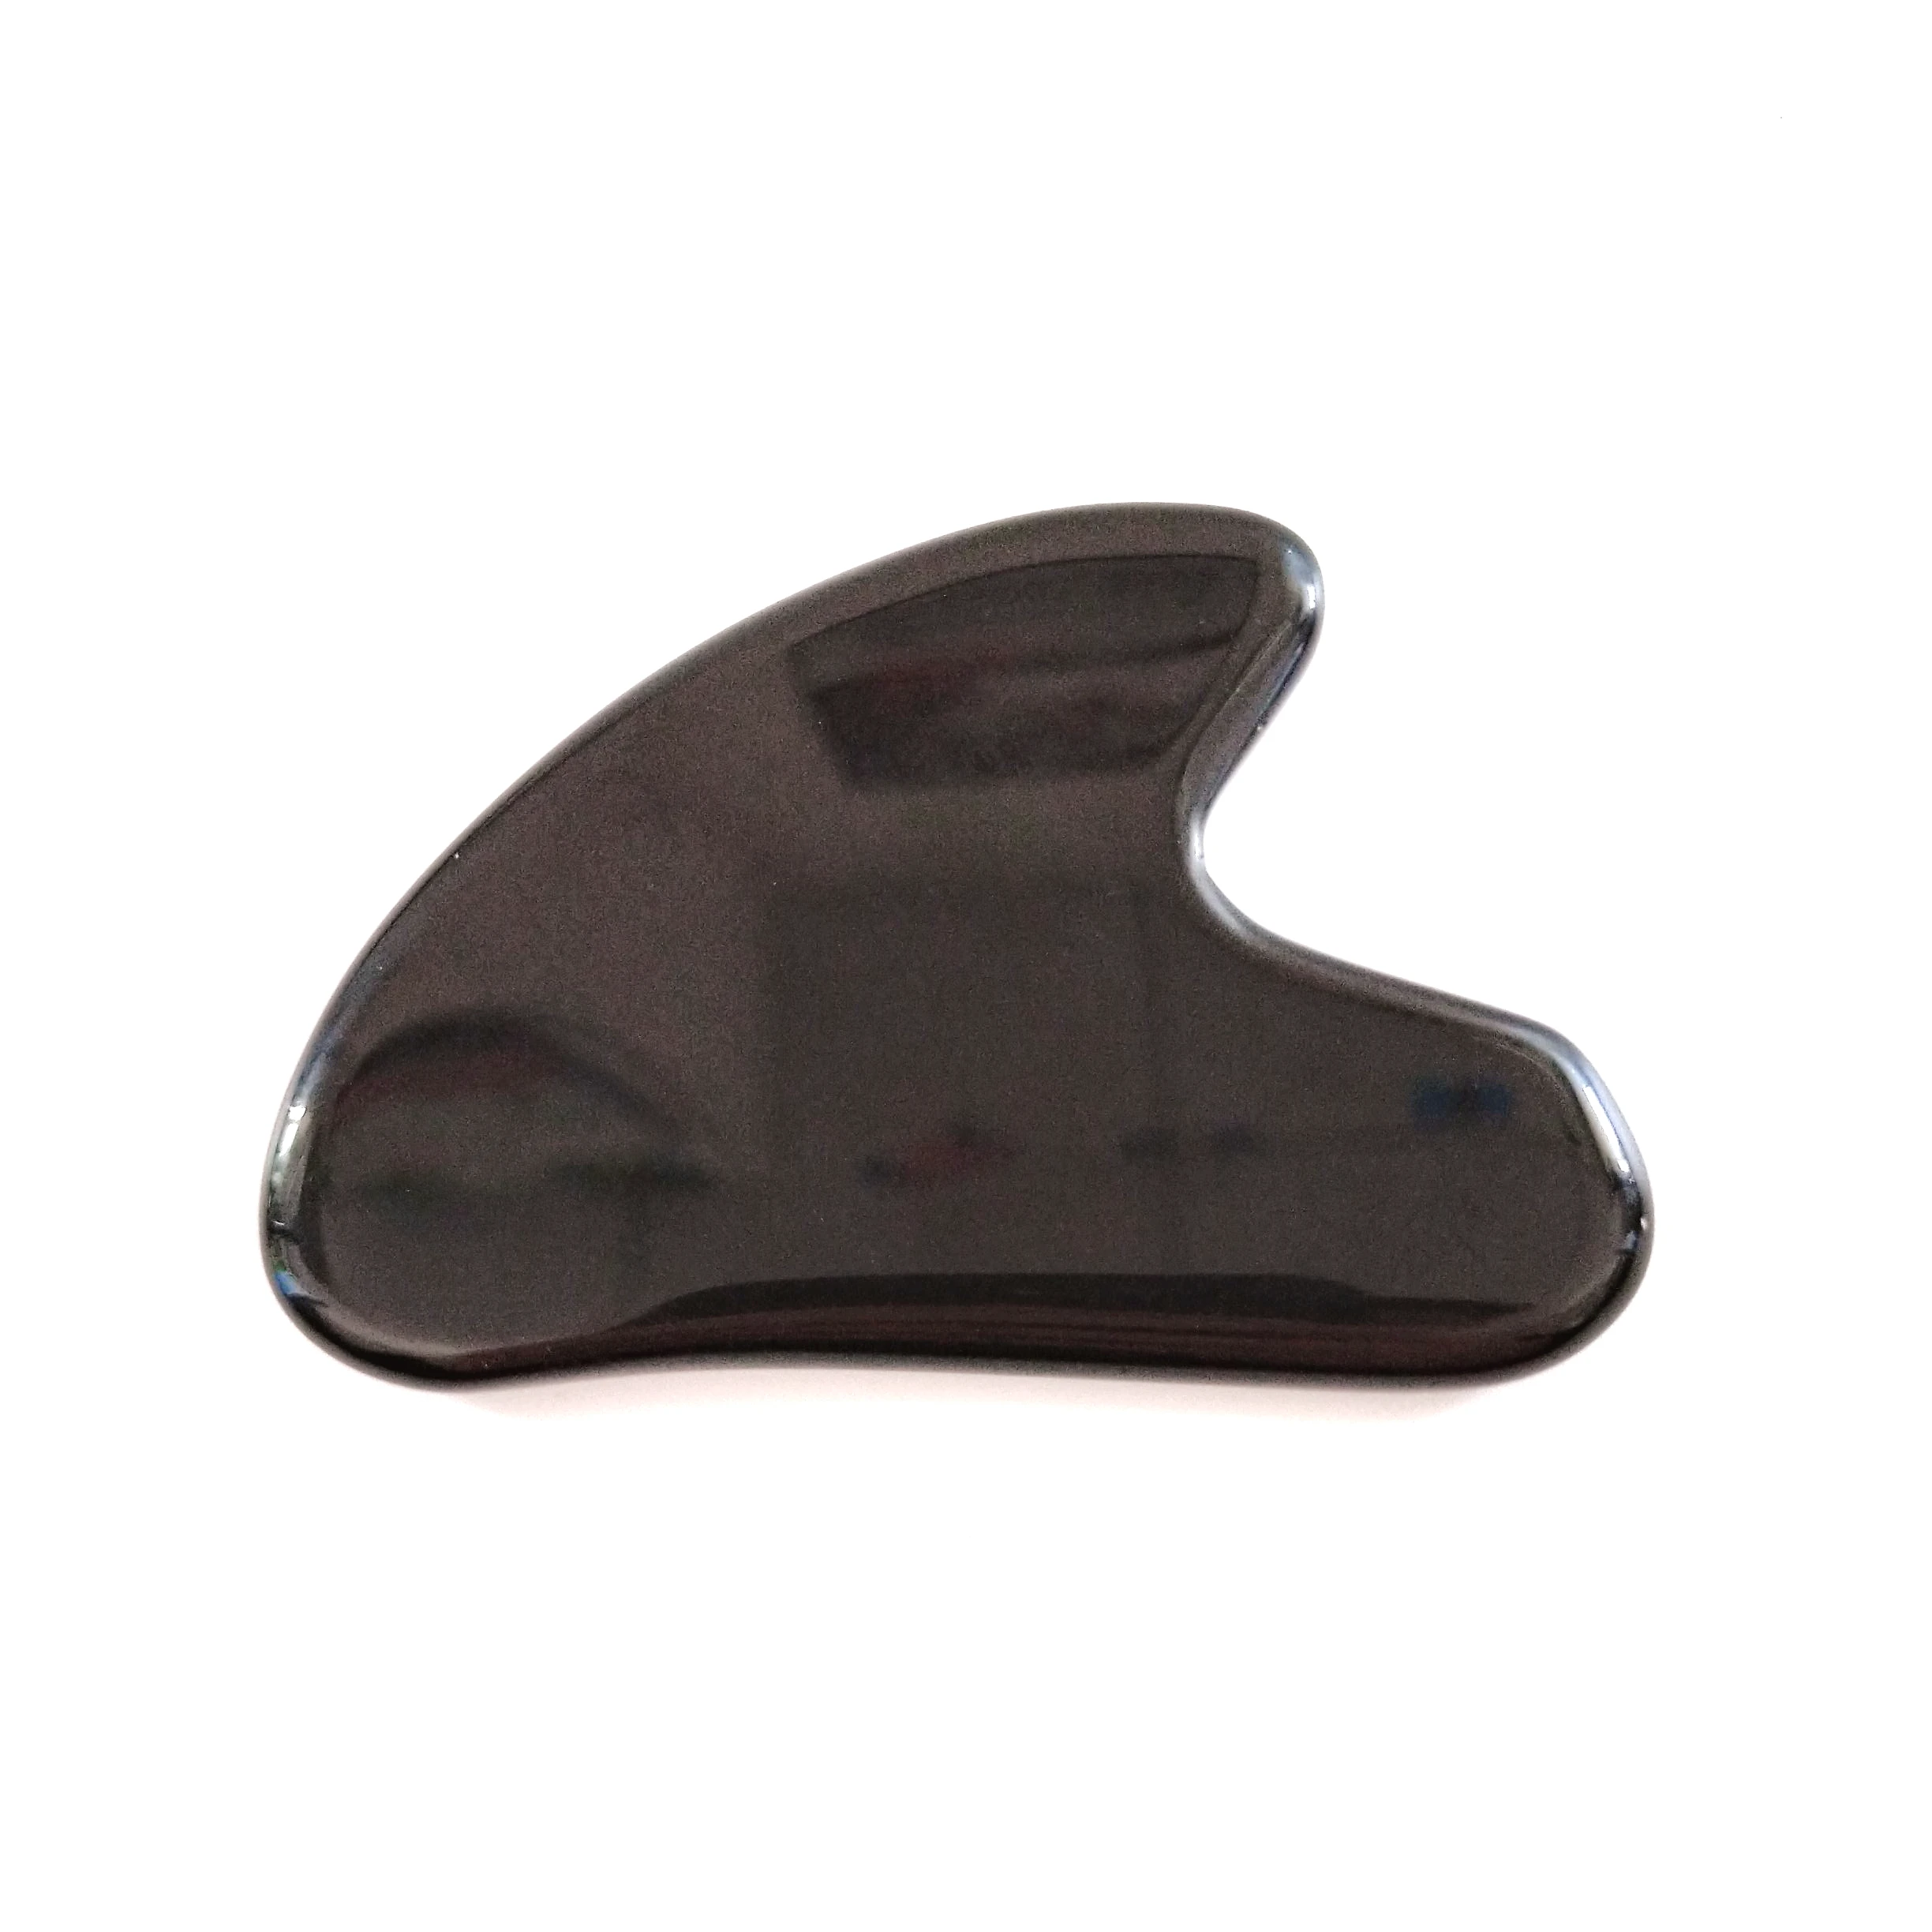 

Gua Sha Tool - Black obsidian Guasha Scraping Massage Tool, Facial Massage for Lymphatic Drainage for Face, Neck and Body